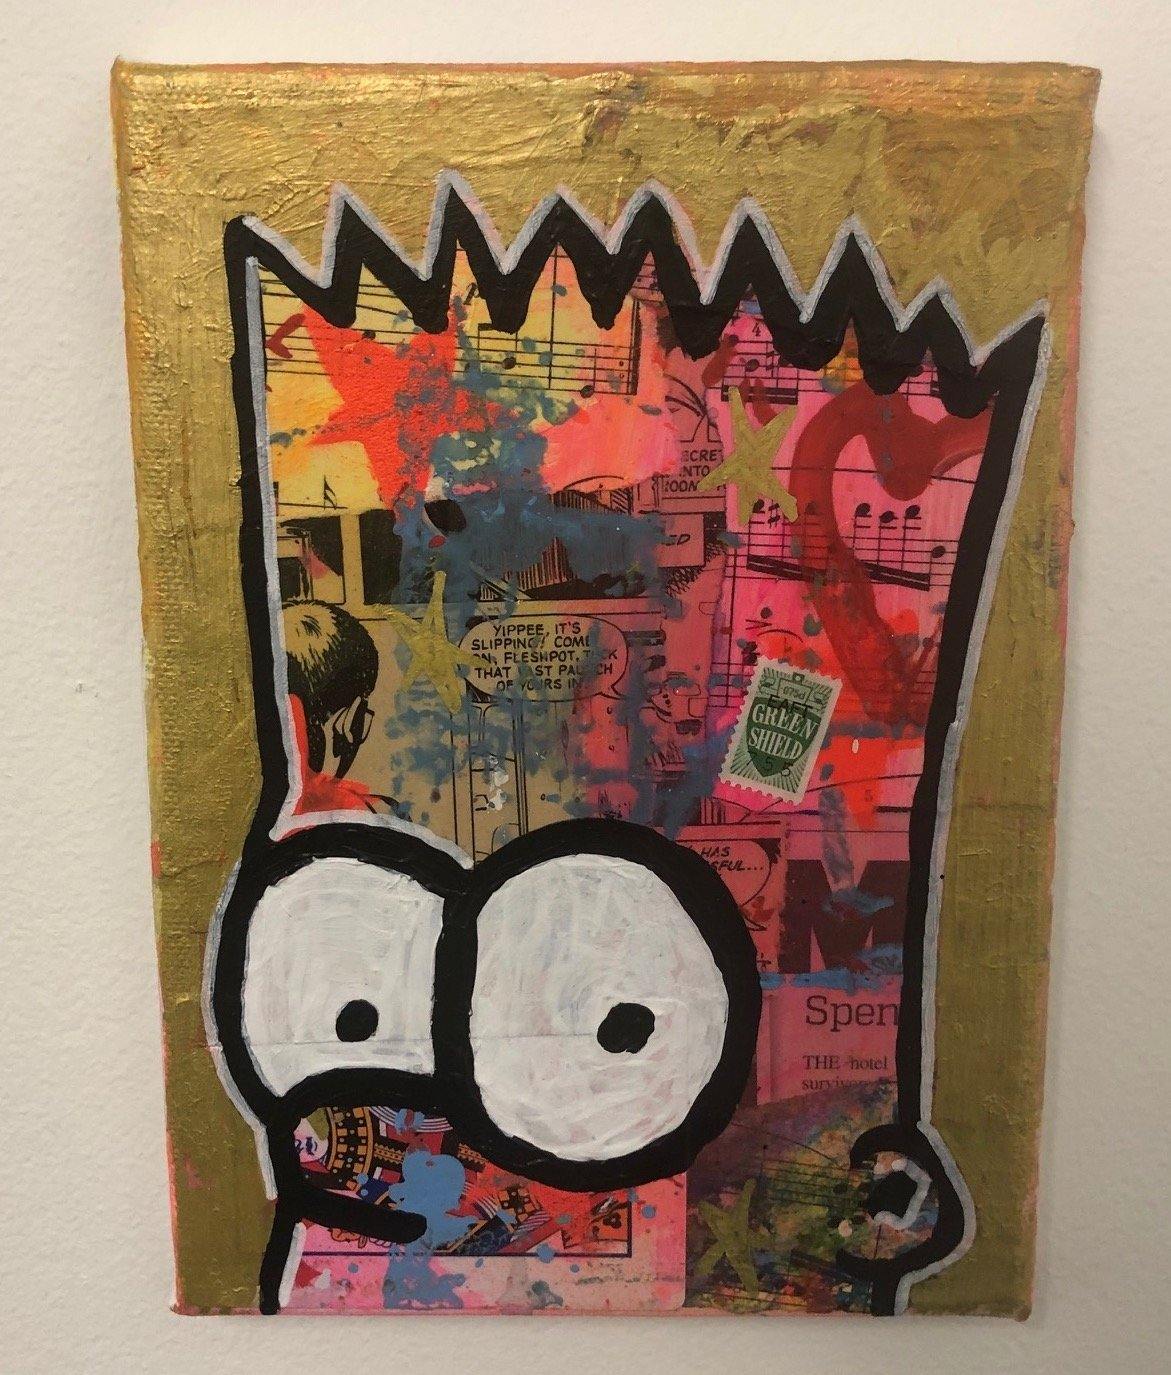 Out of my head by Barrie J Davies 2019, Fun Colourful Pop Art Street Artist based in Brighton England UK. Buy online for free delivery worldwide.